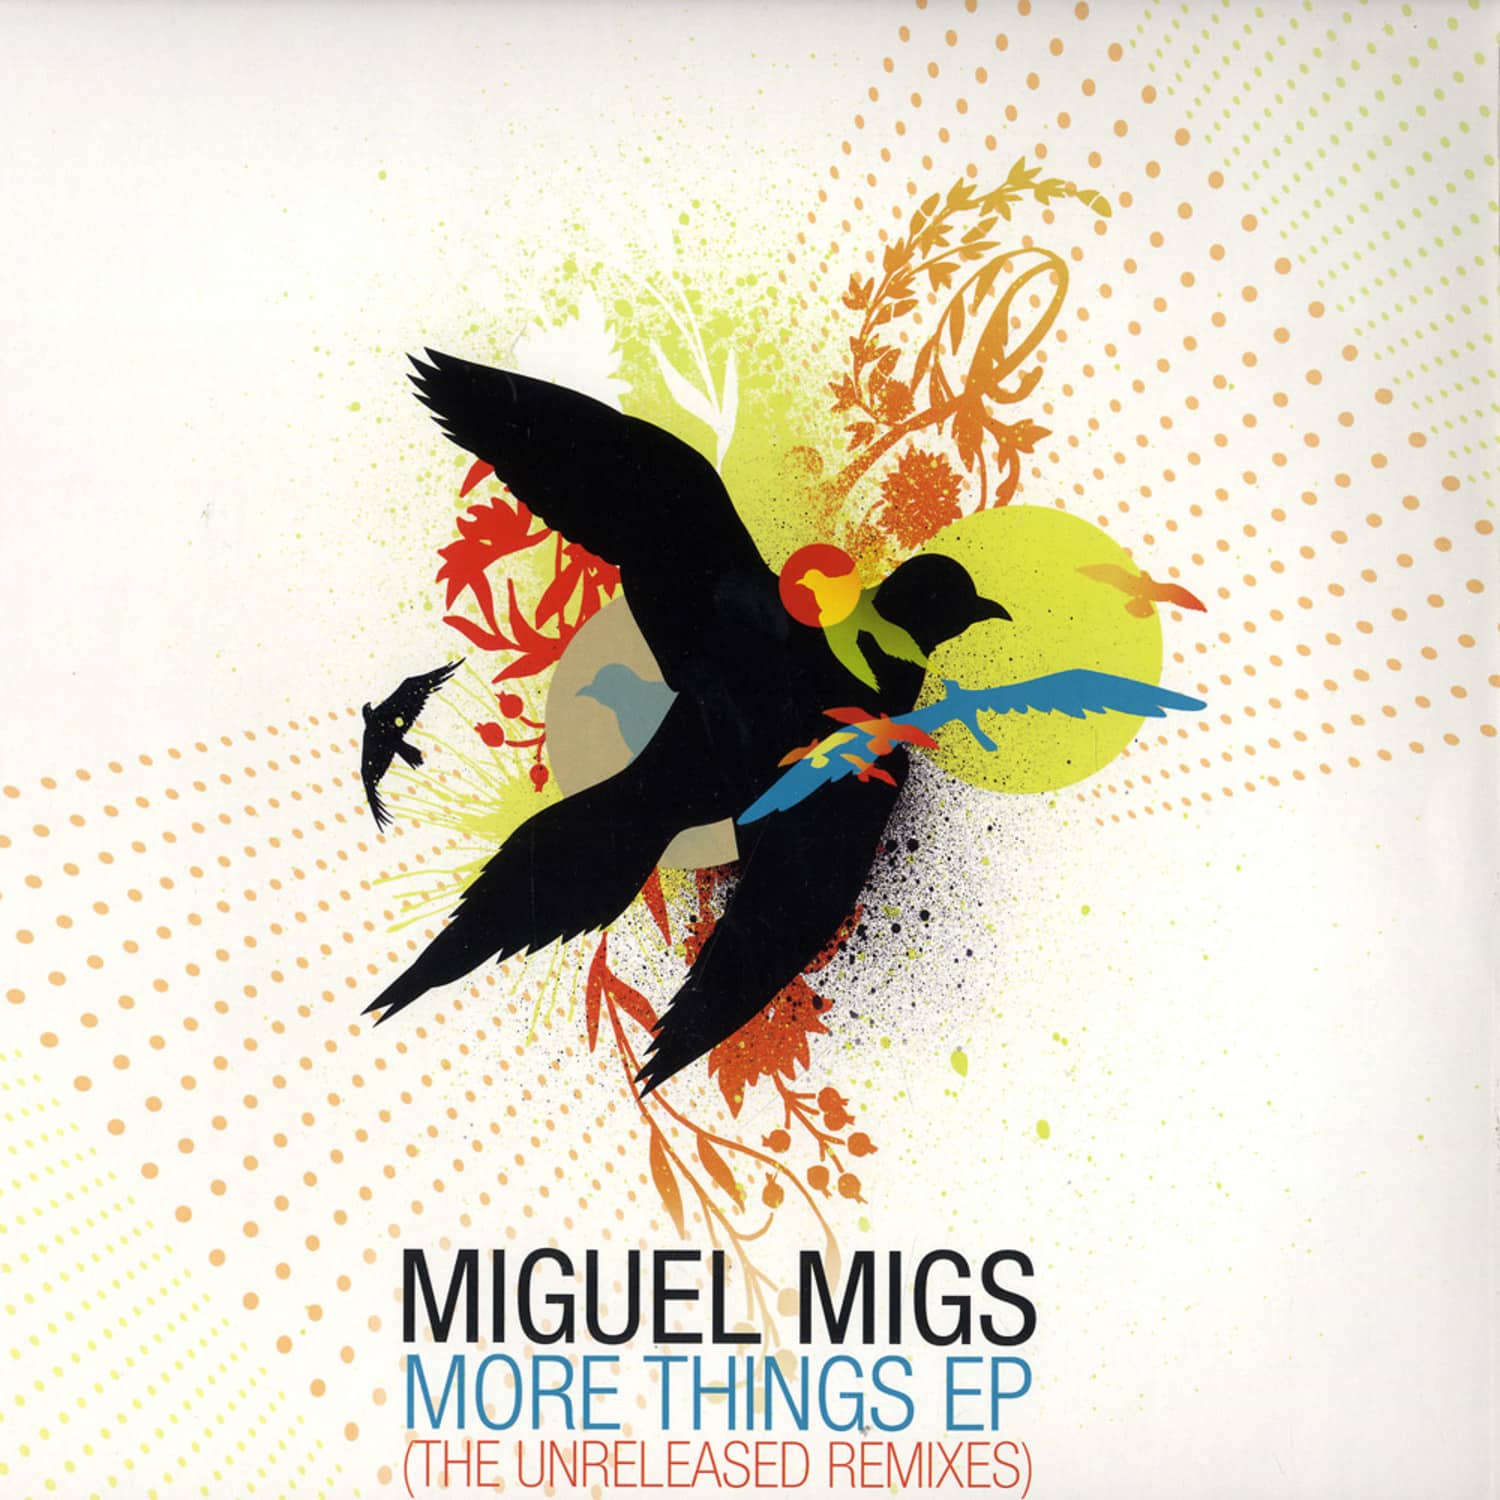 Miguel Migs - MORE THINGS EP